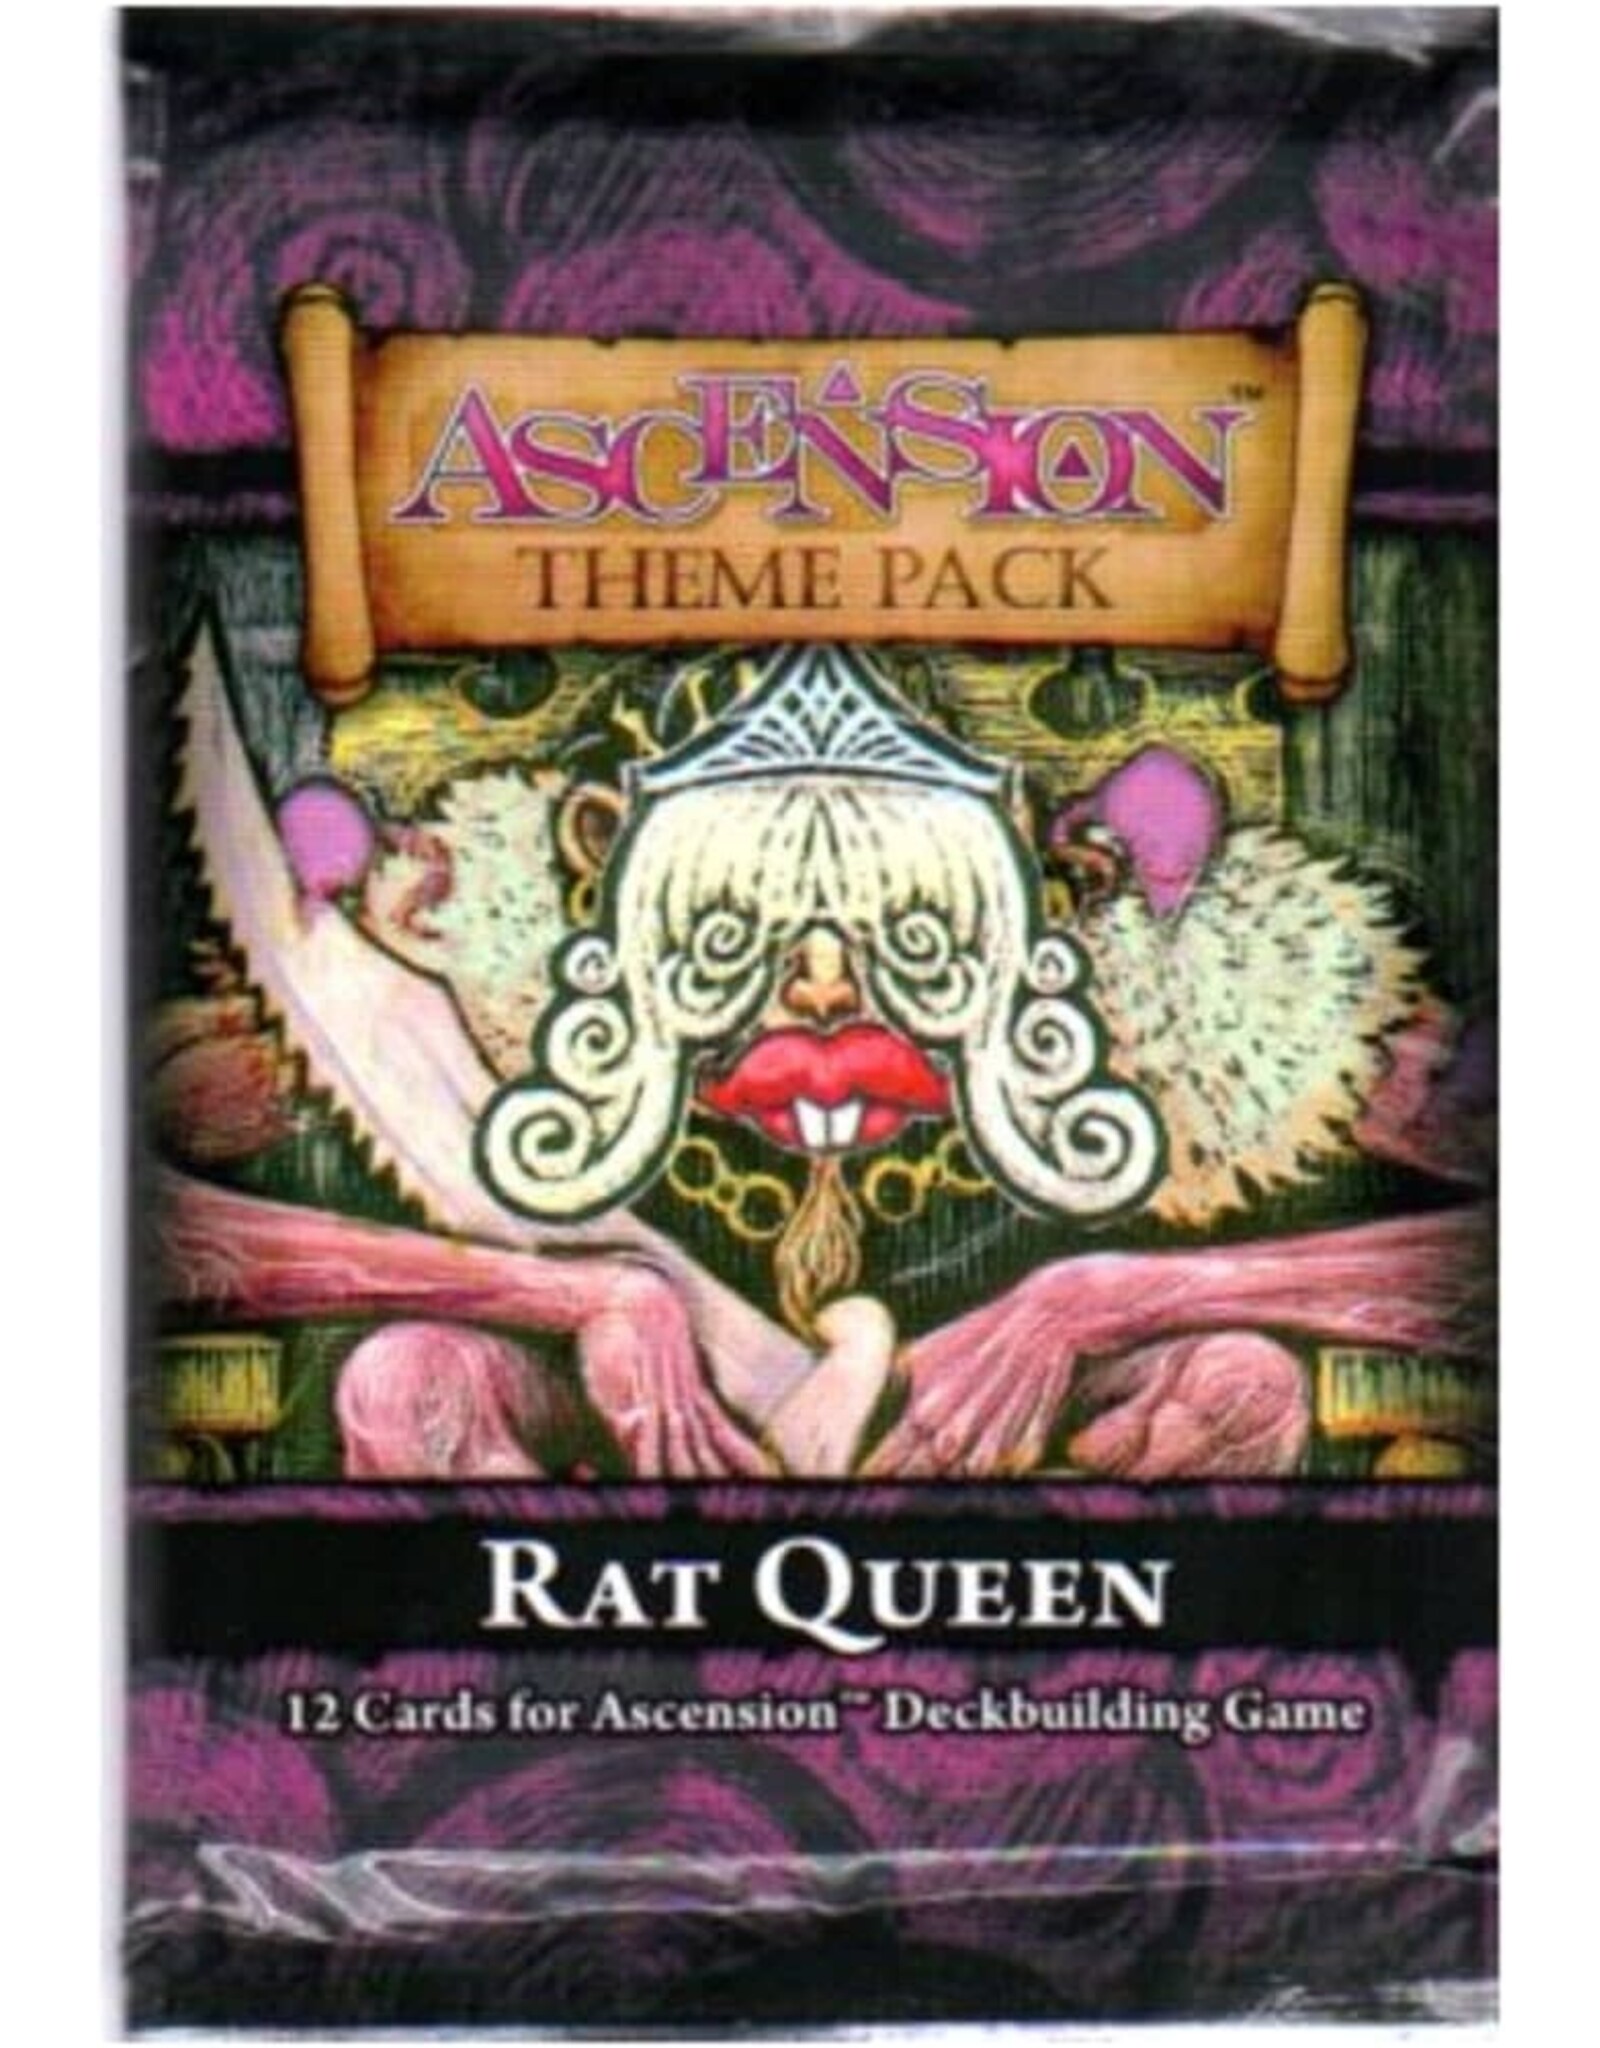 Stone Blade Entertainment Ascension: Theme Pack - Rat Queen (2012) NIS